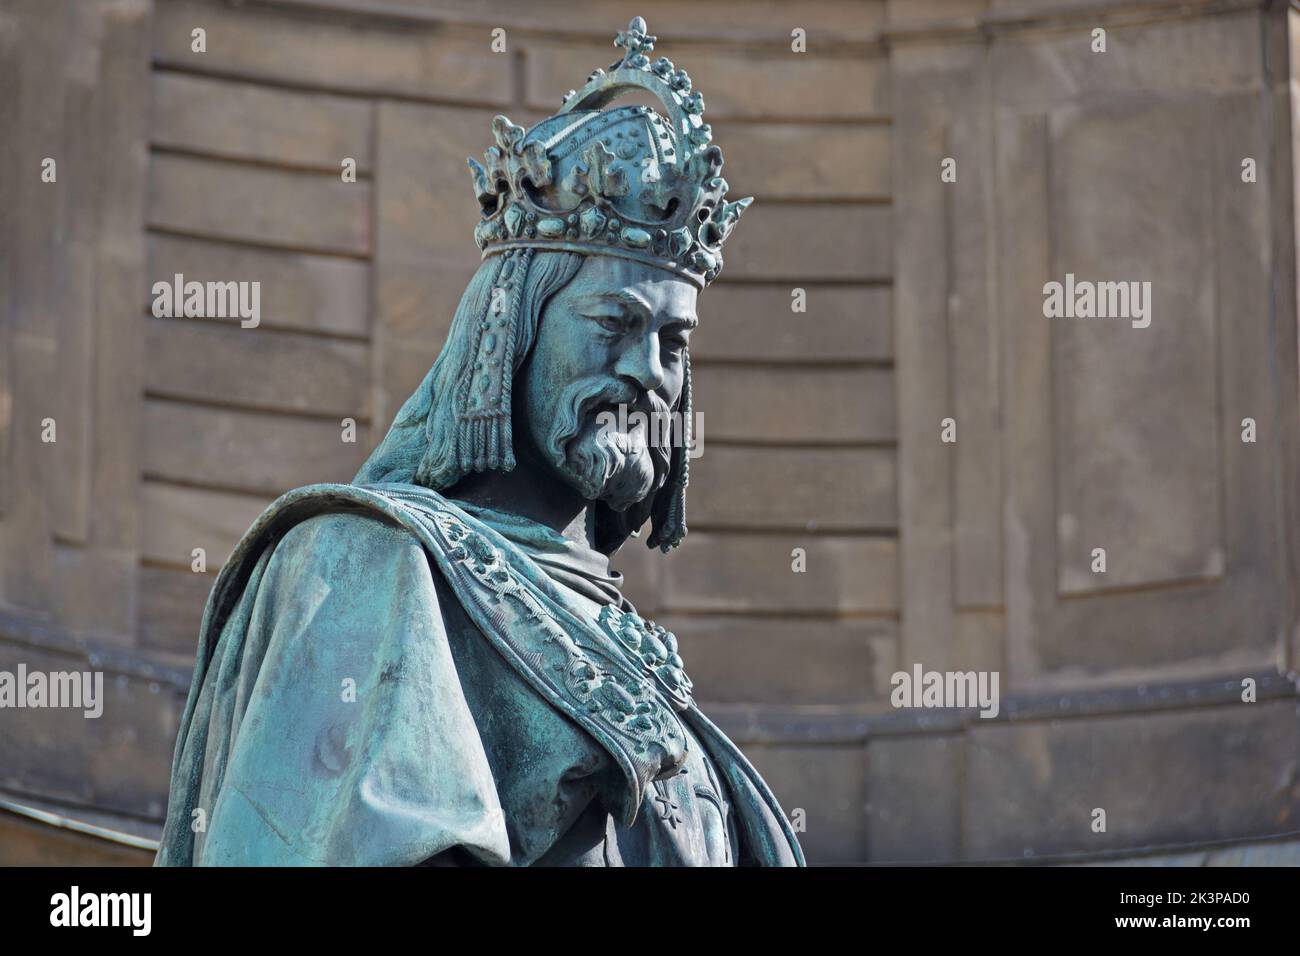 Prague photo series: Monument of Charles IV in front of Charles Bridge in Prague Stock Photo